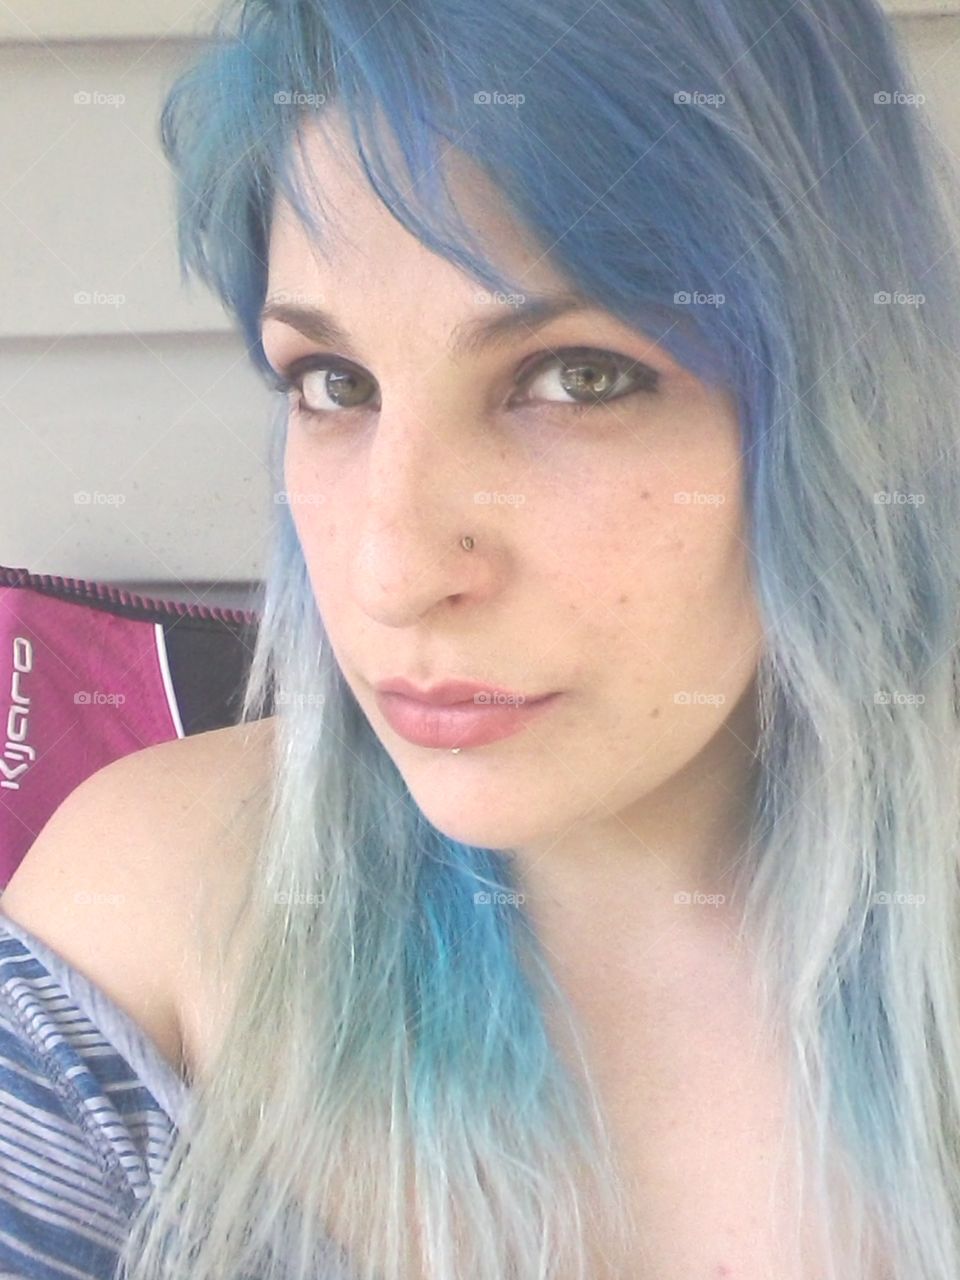 Icy Stare. One of my many new hair color selfies. What can I say, I'm obsessed with dye.